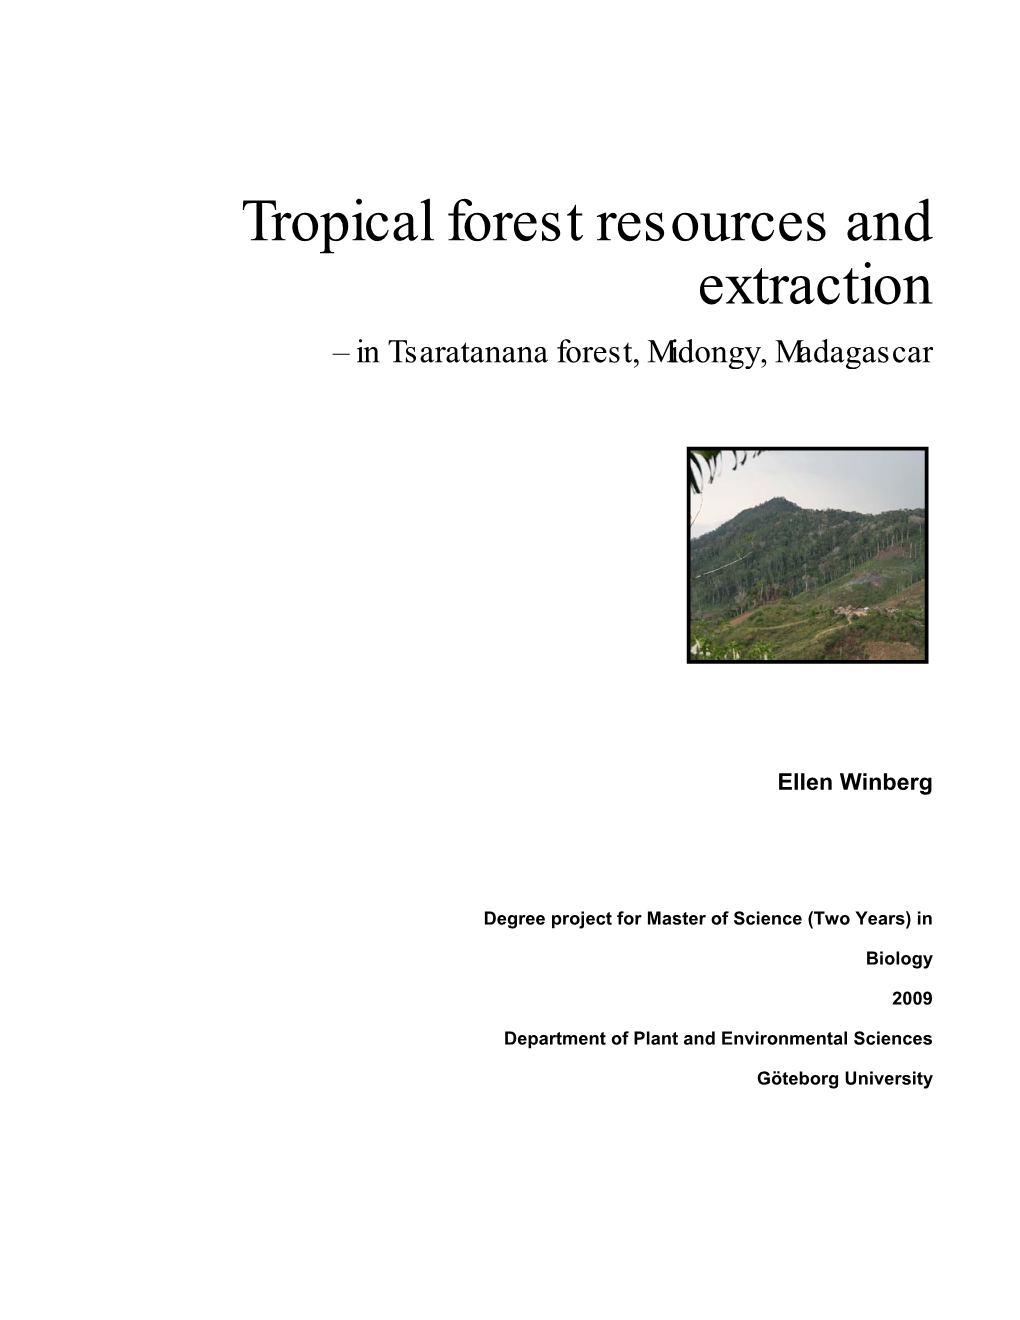 Tropical Forest Resources and Extraction